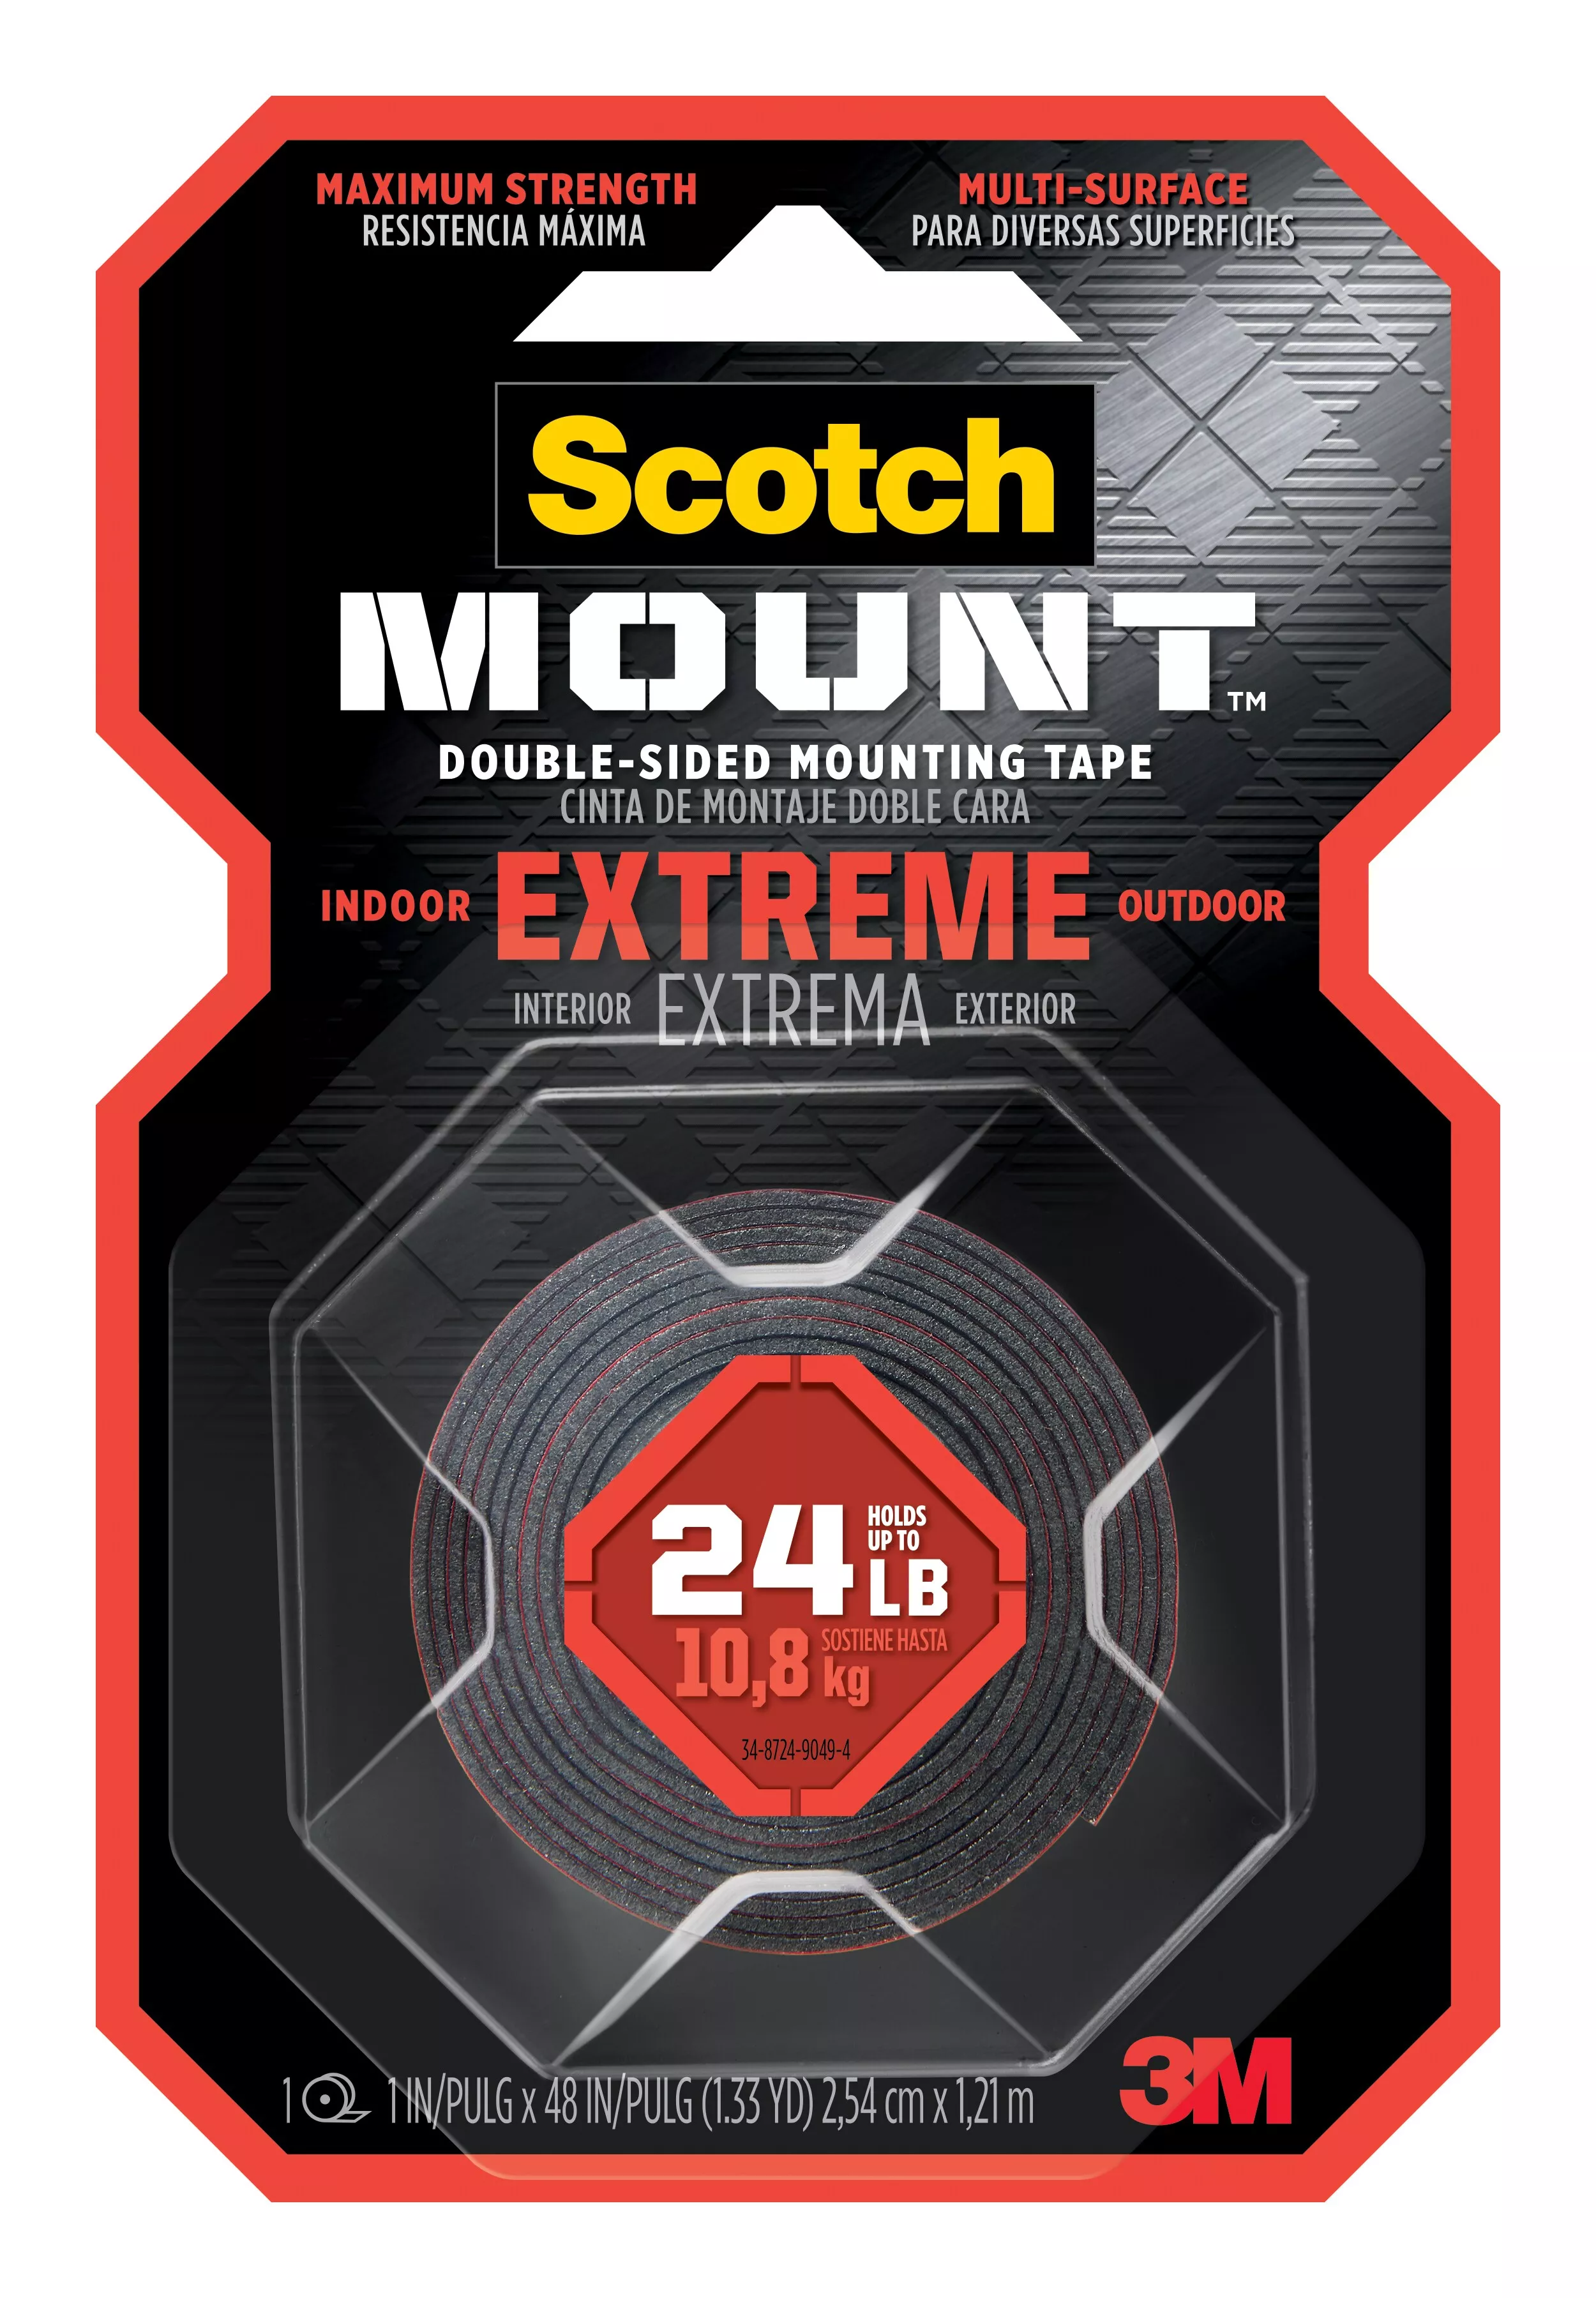 Scotch-Mount™ Extreme Double-Sided Mounting Tape 414H-48, 1 in x 48 in (2,54 cm x 1,21 m)